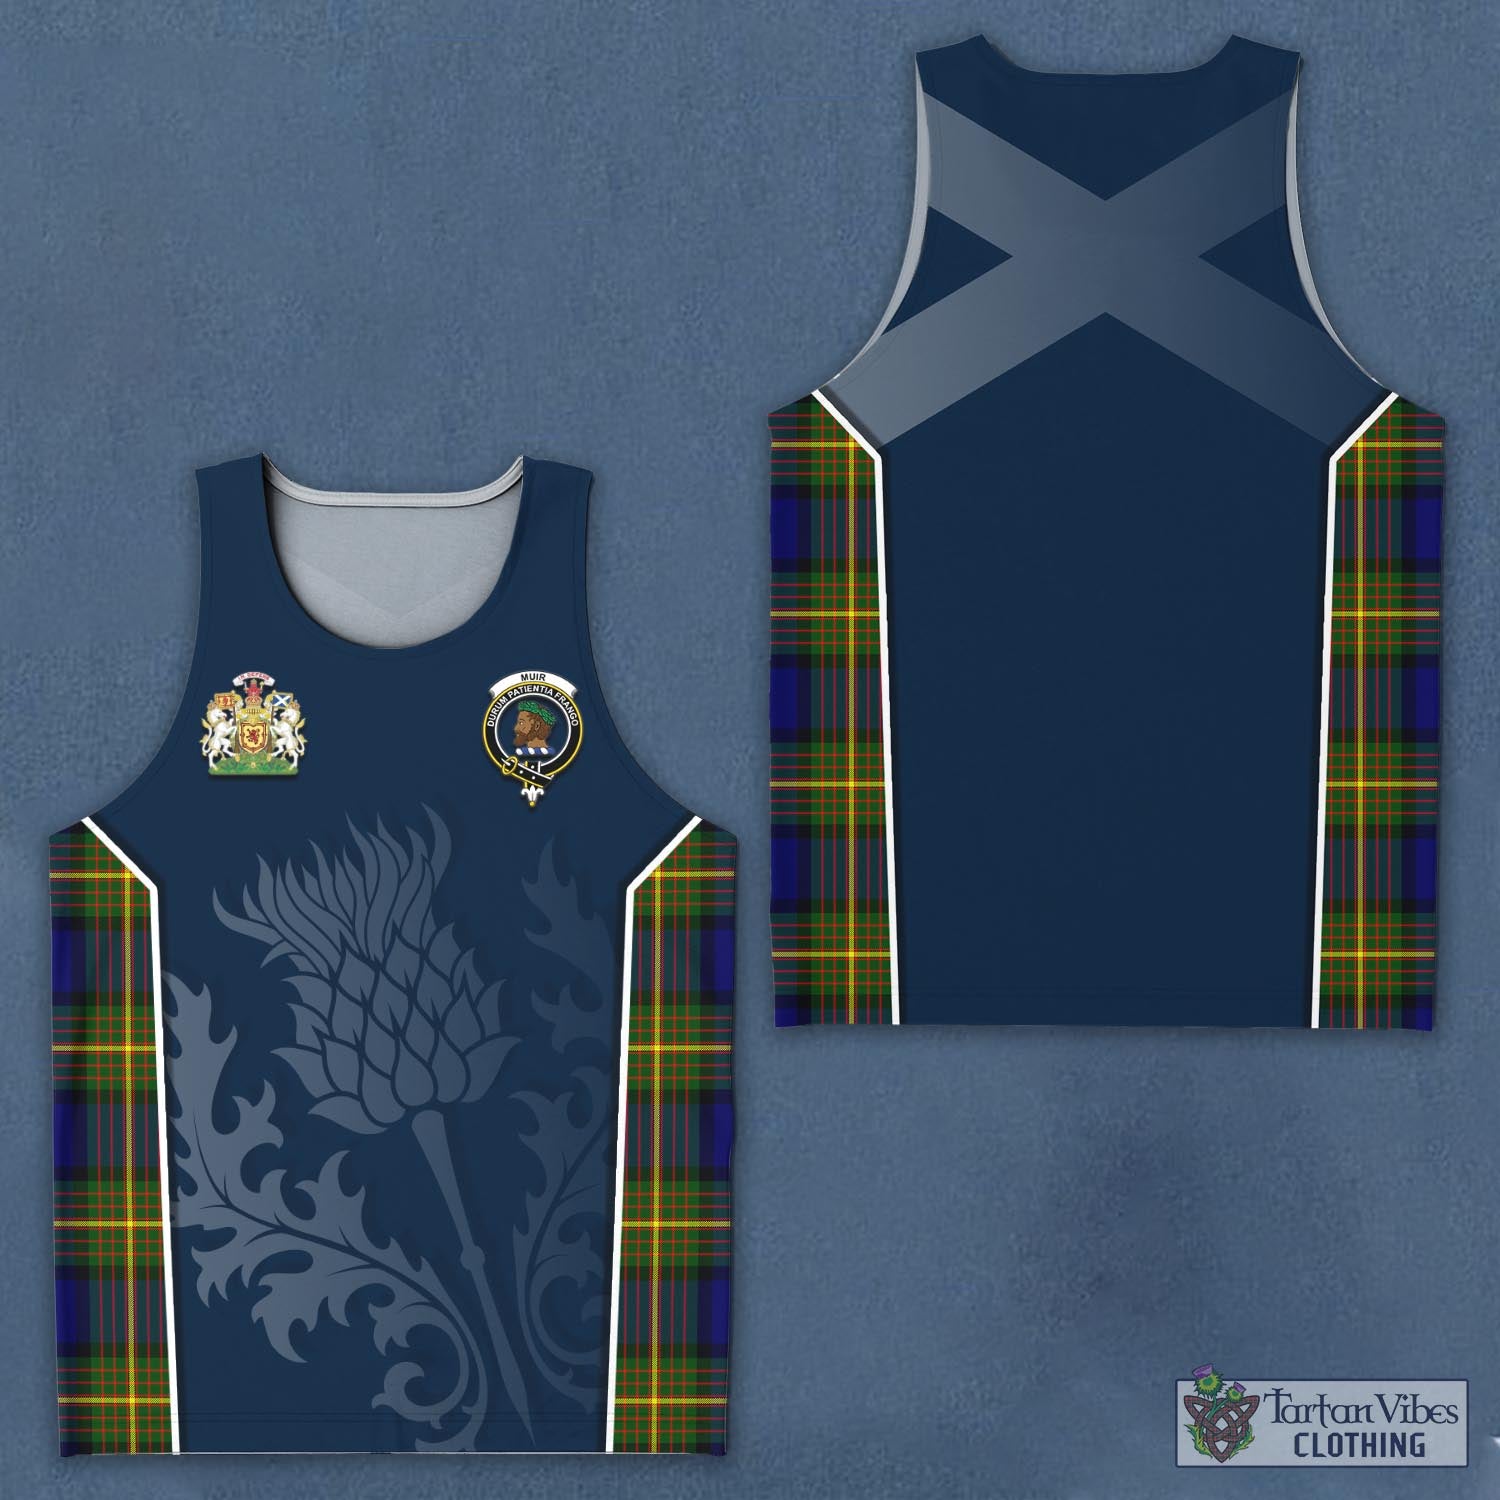 Tartan Vibes Clothing Muir Tartan Men's Tanks Top with Family Crest and Scottish Thistle Vibes Sport Style